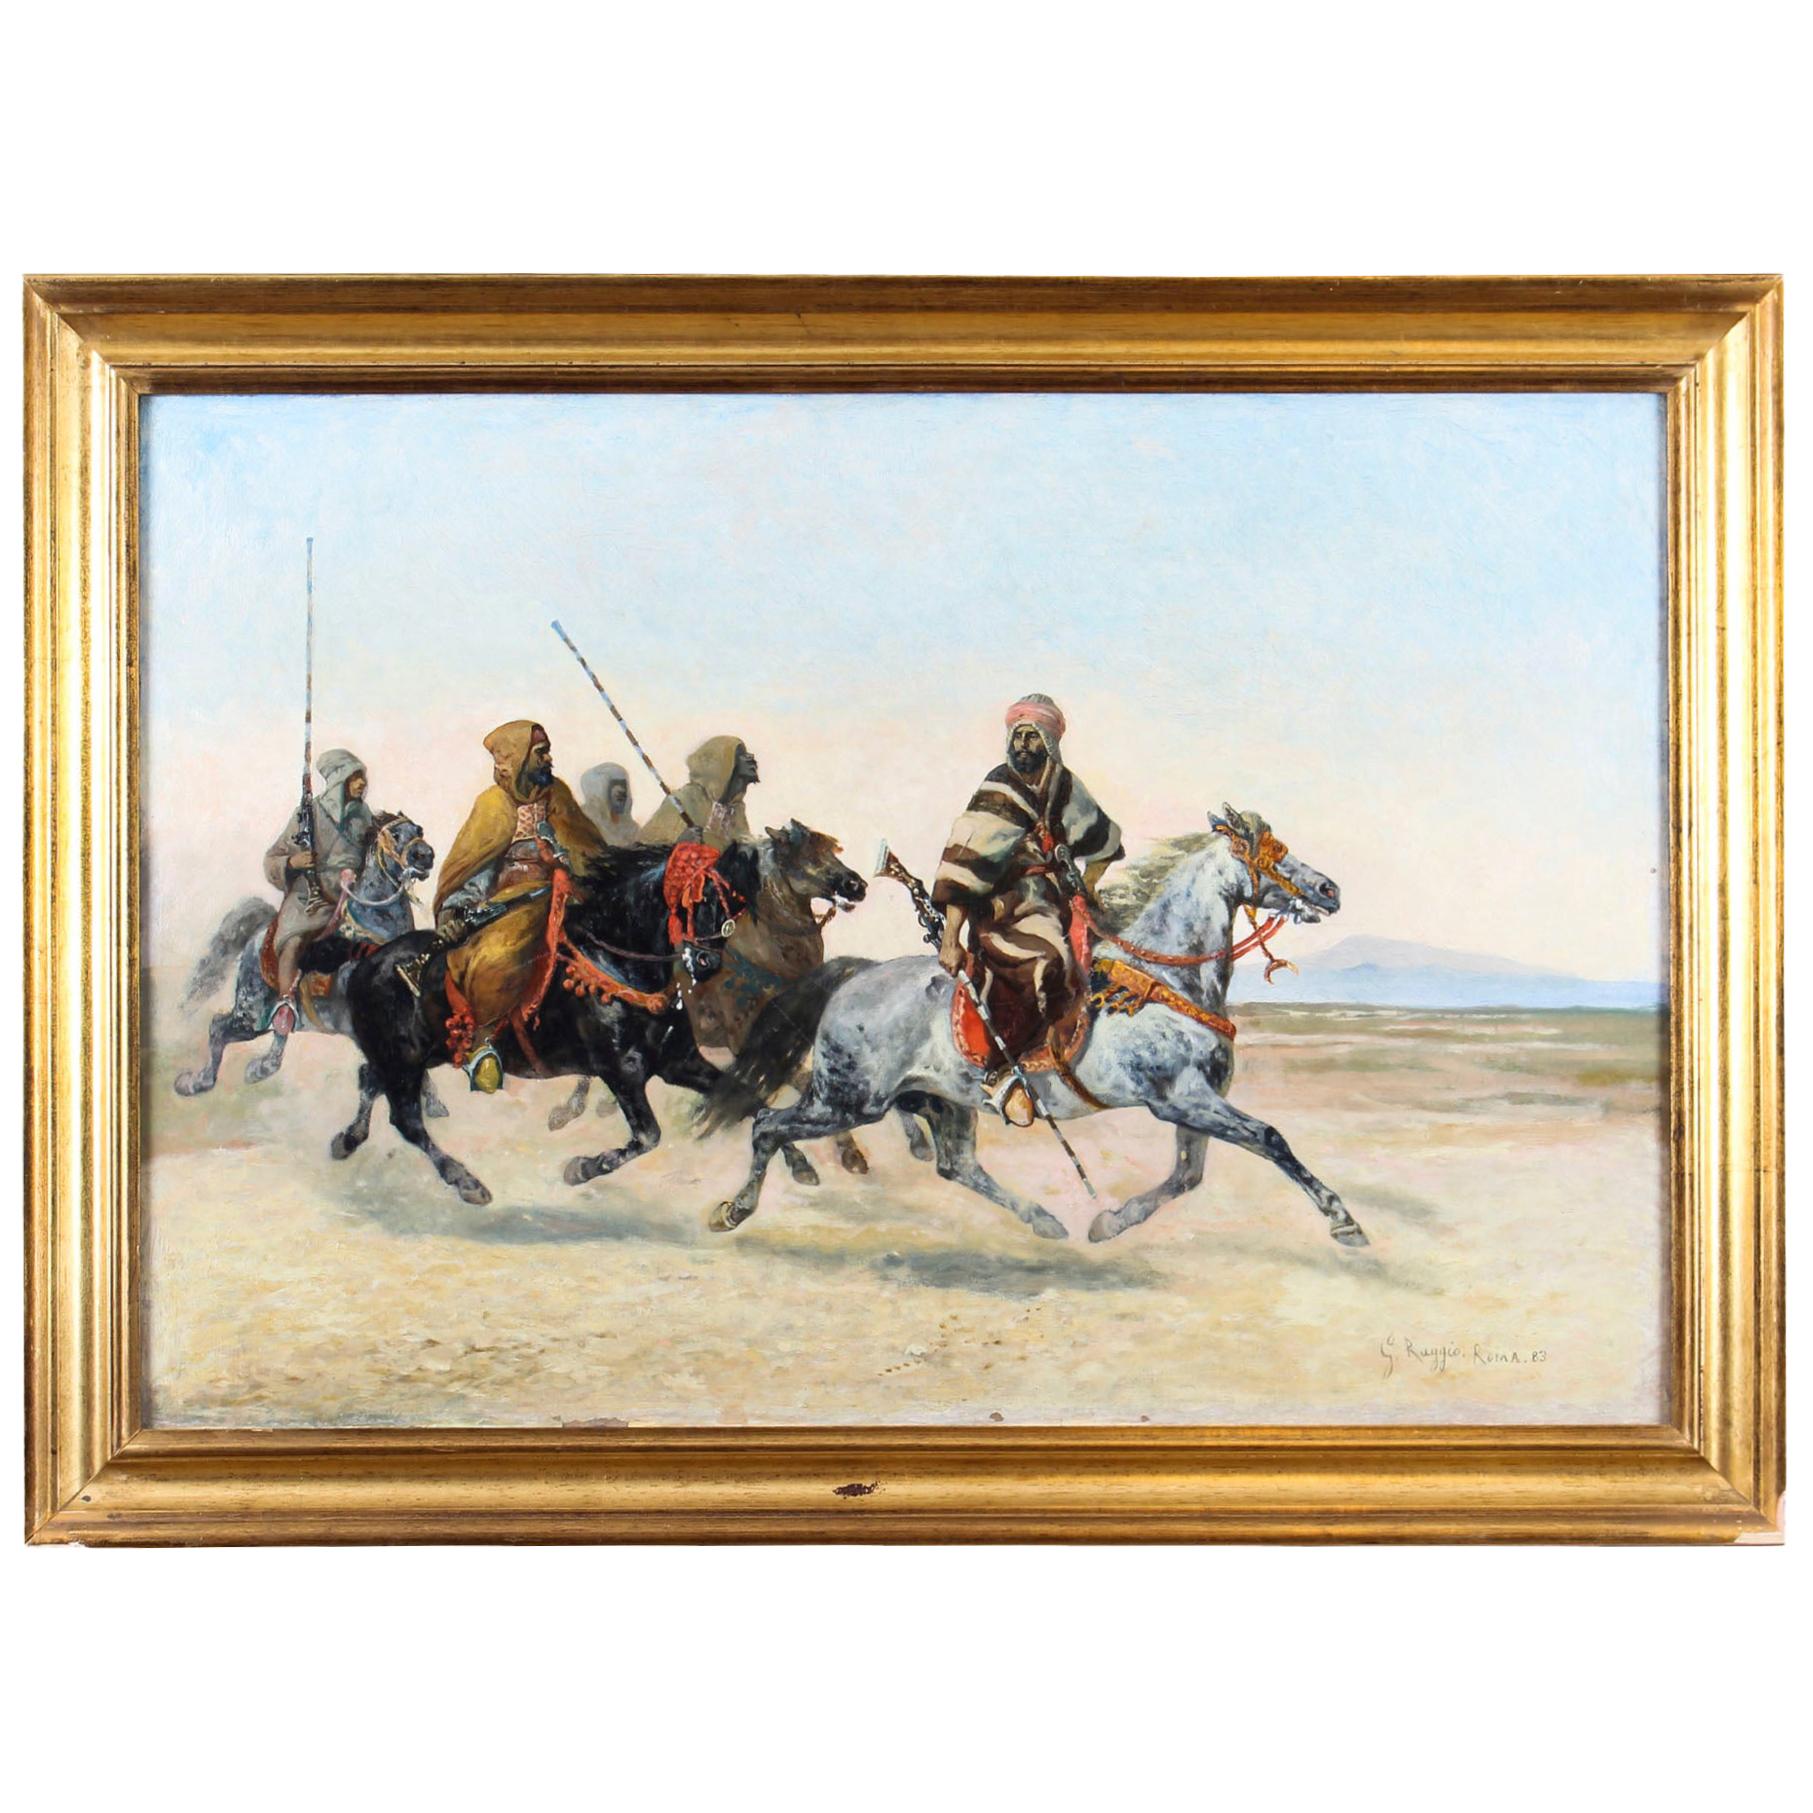 Antique Painting Bedouin War Party by Giuseppe Raggio 1883 19th Century